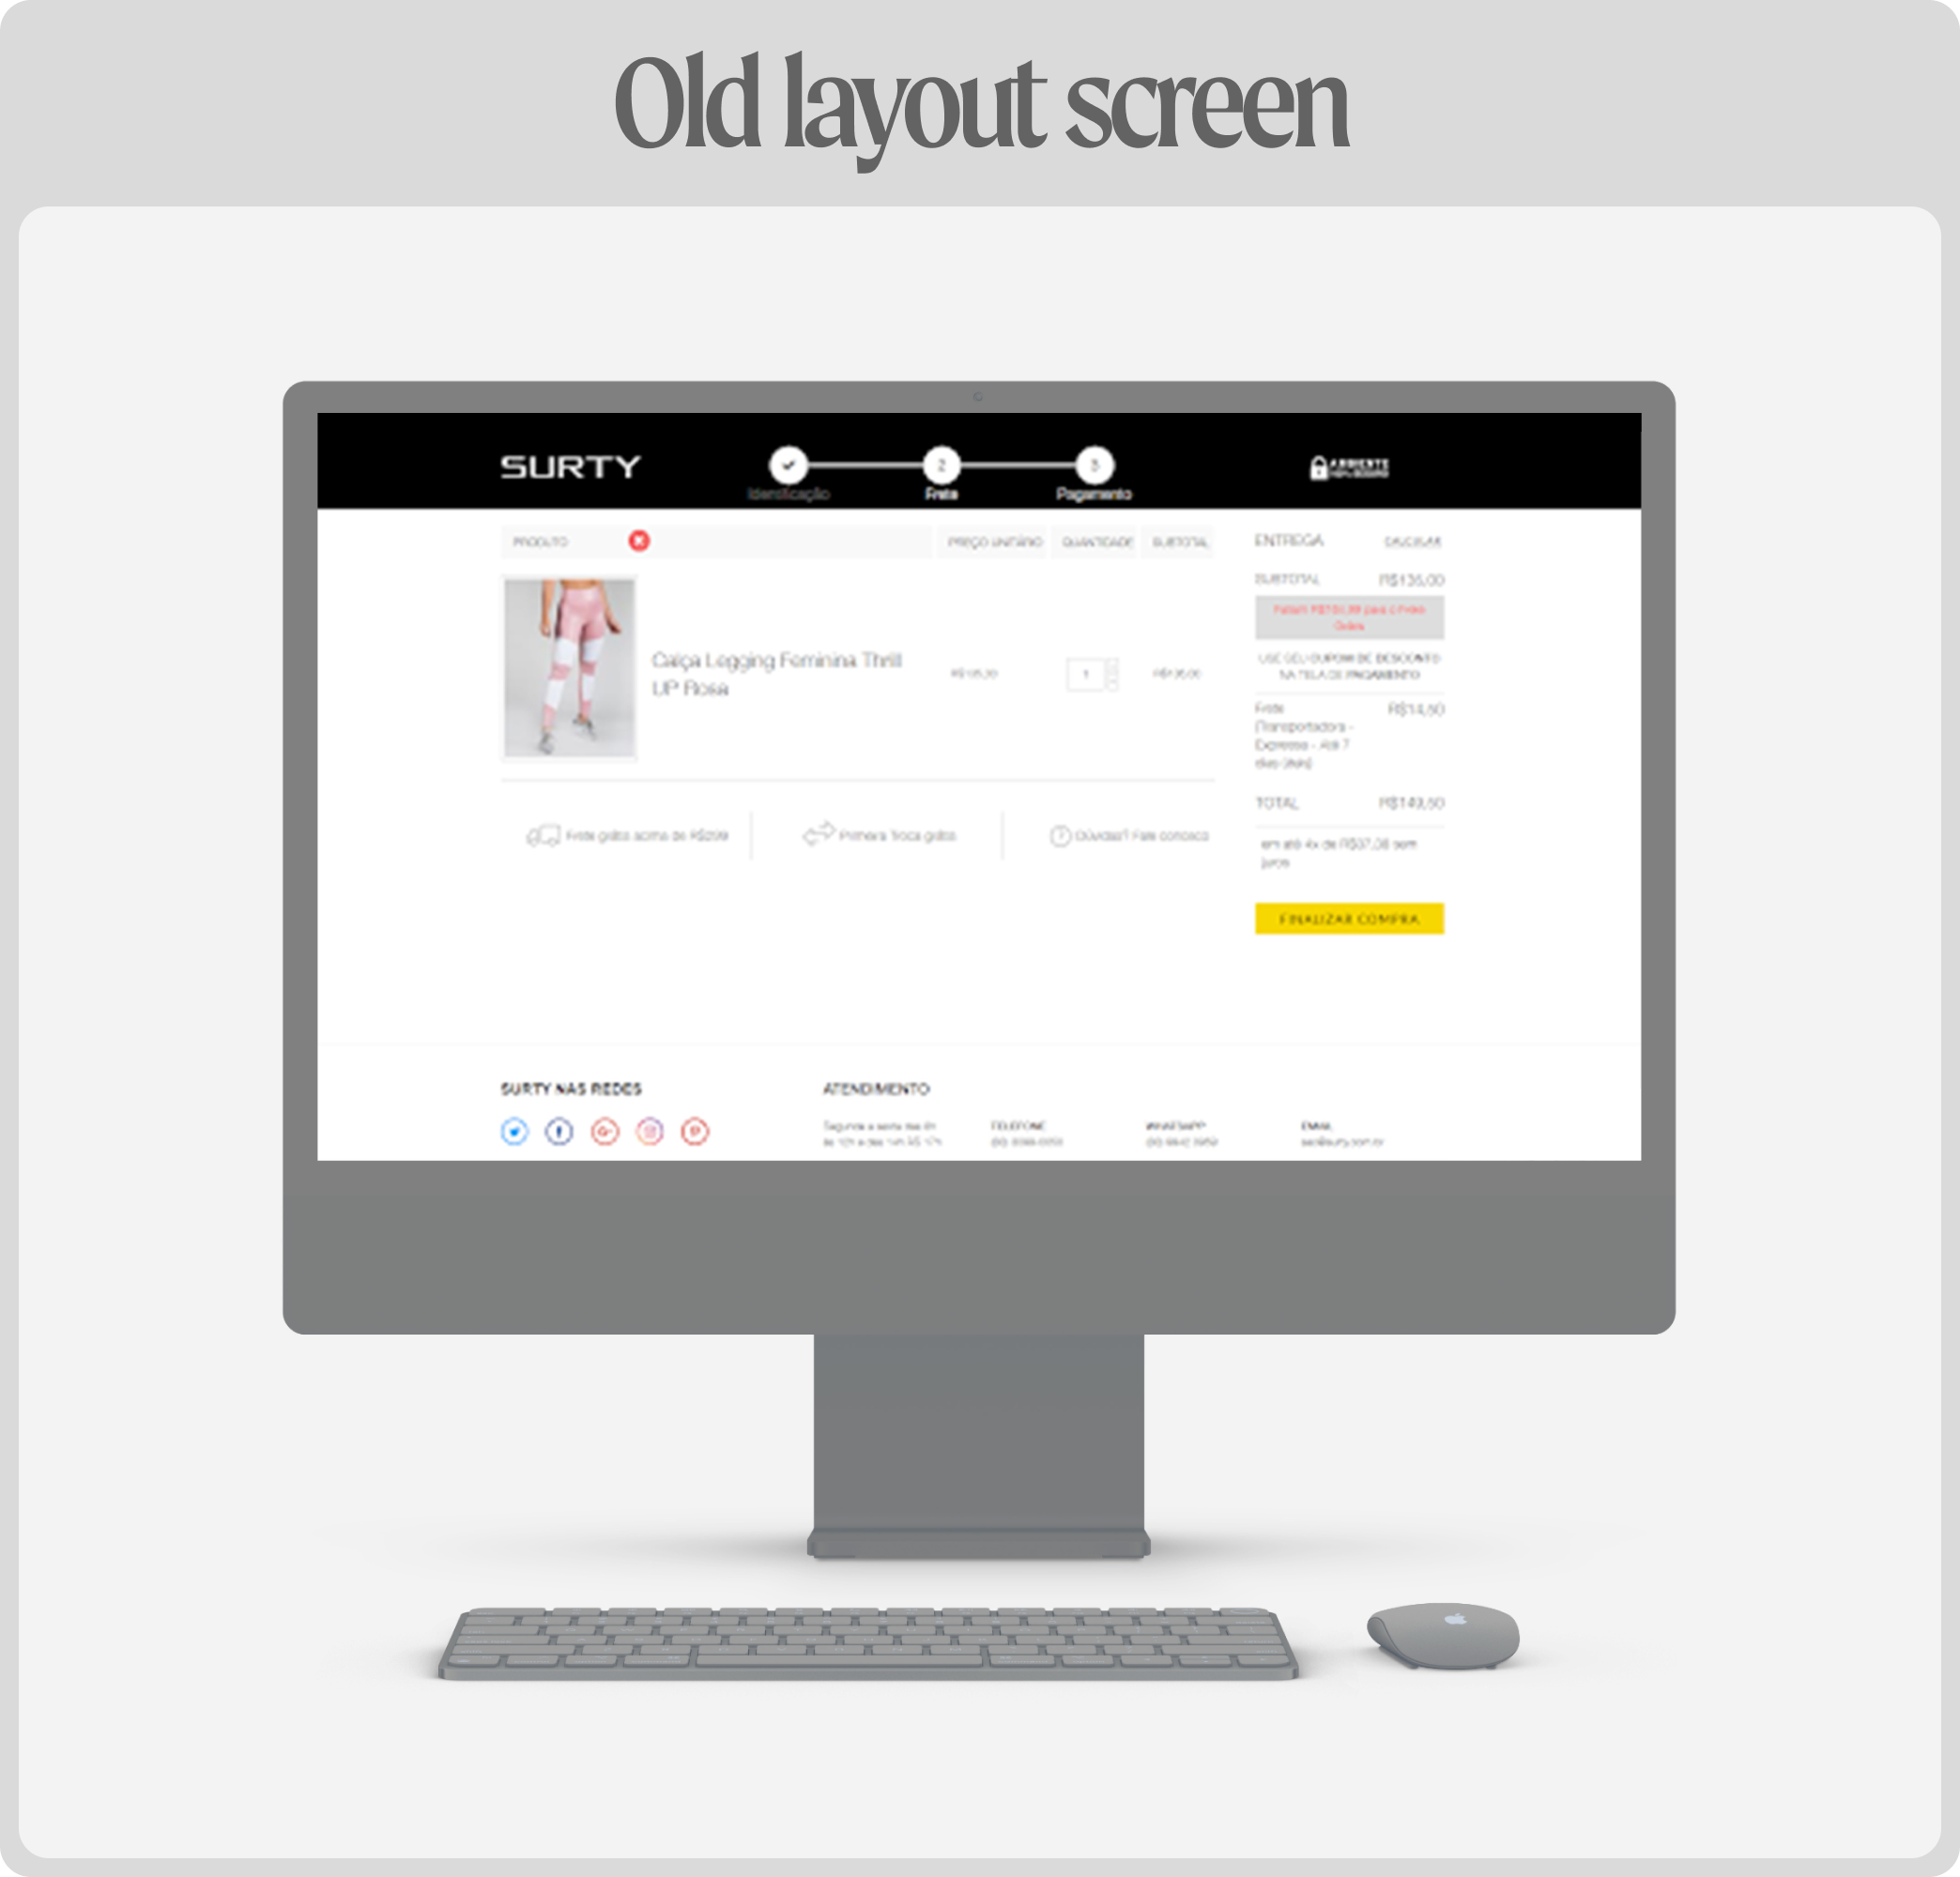 Old laout screen